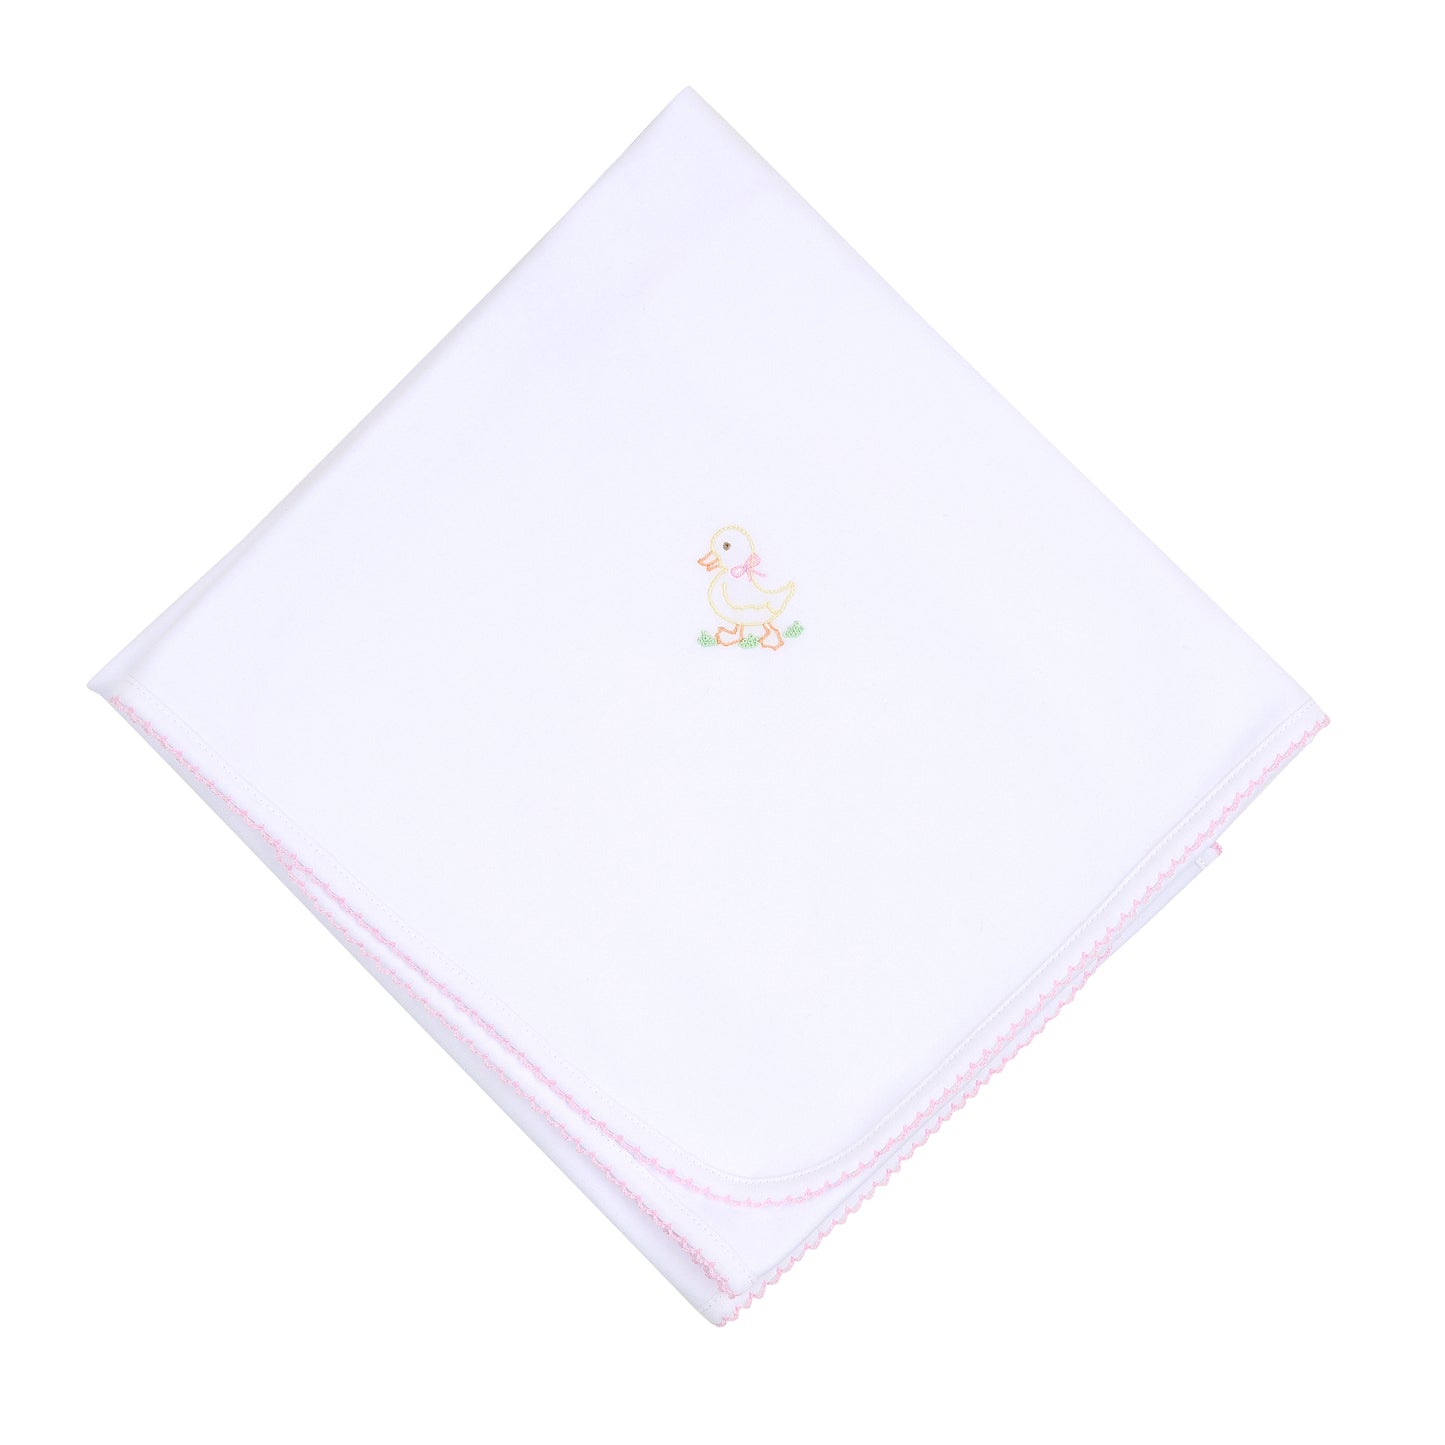 Pink Little Quacker Embroidered Receiving Blanket made by Magnolia Baby.